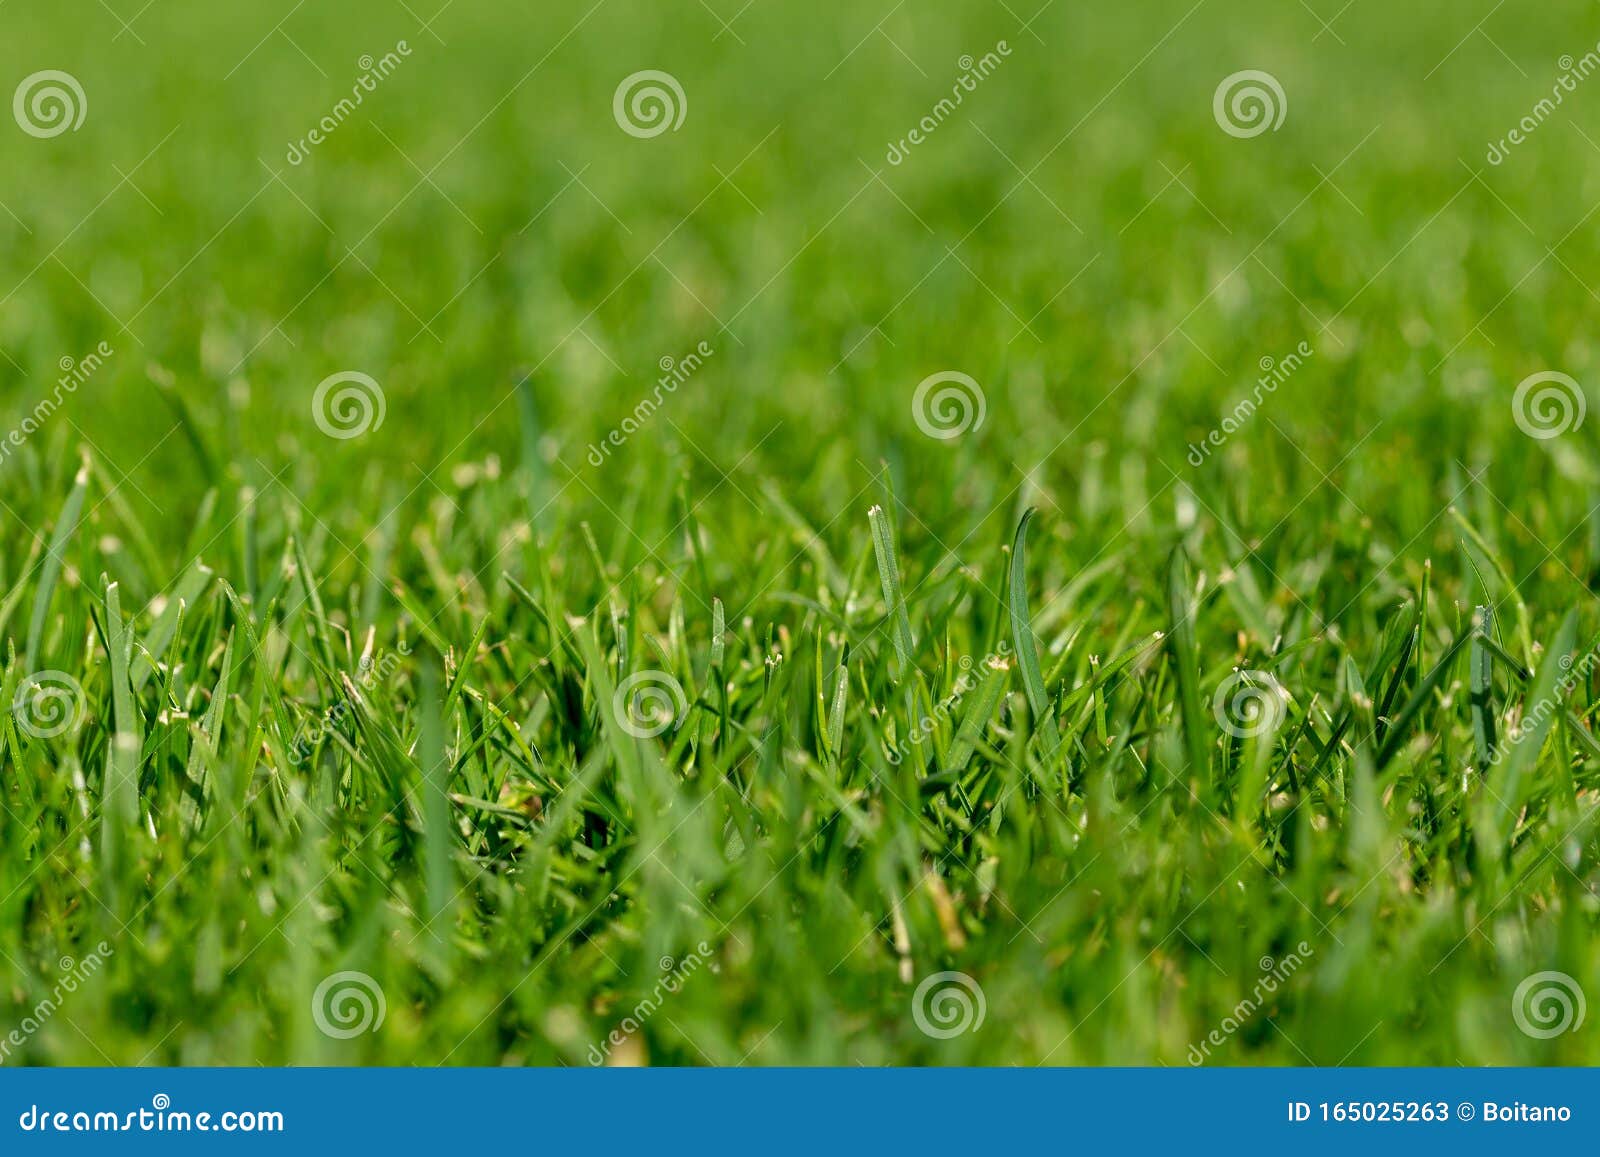 Close-up Shot Of Mowed Lawn. Green Grass Natural Background Texture